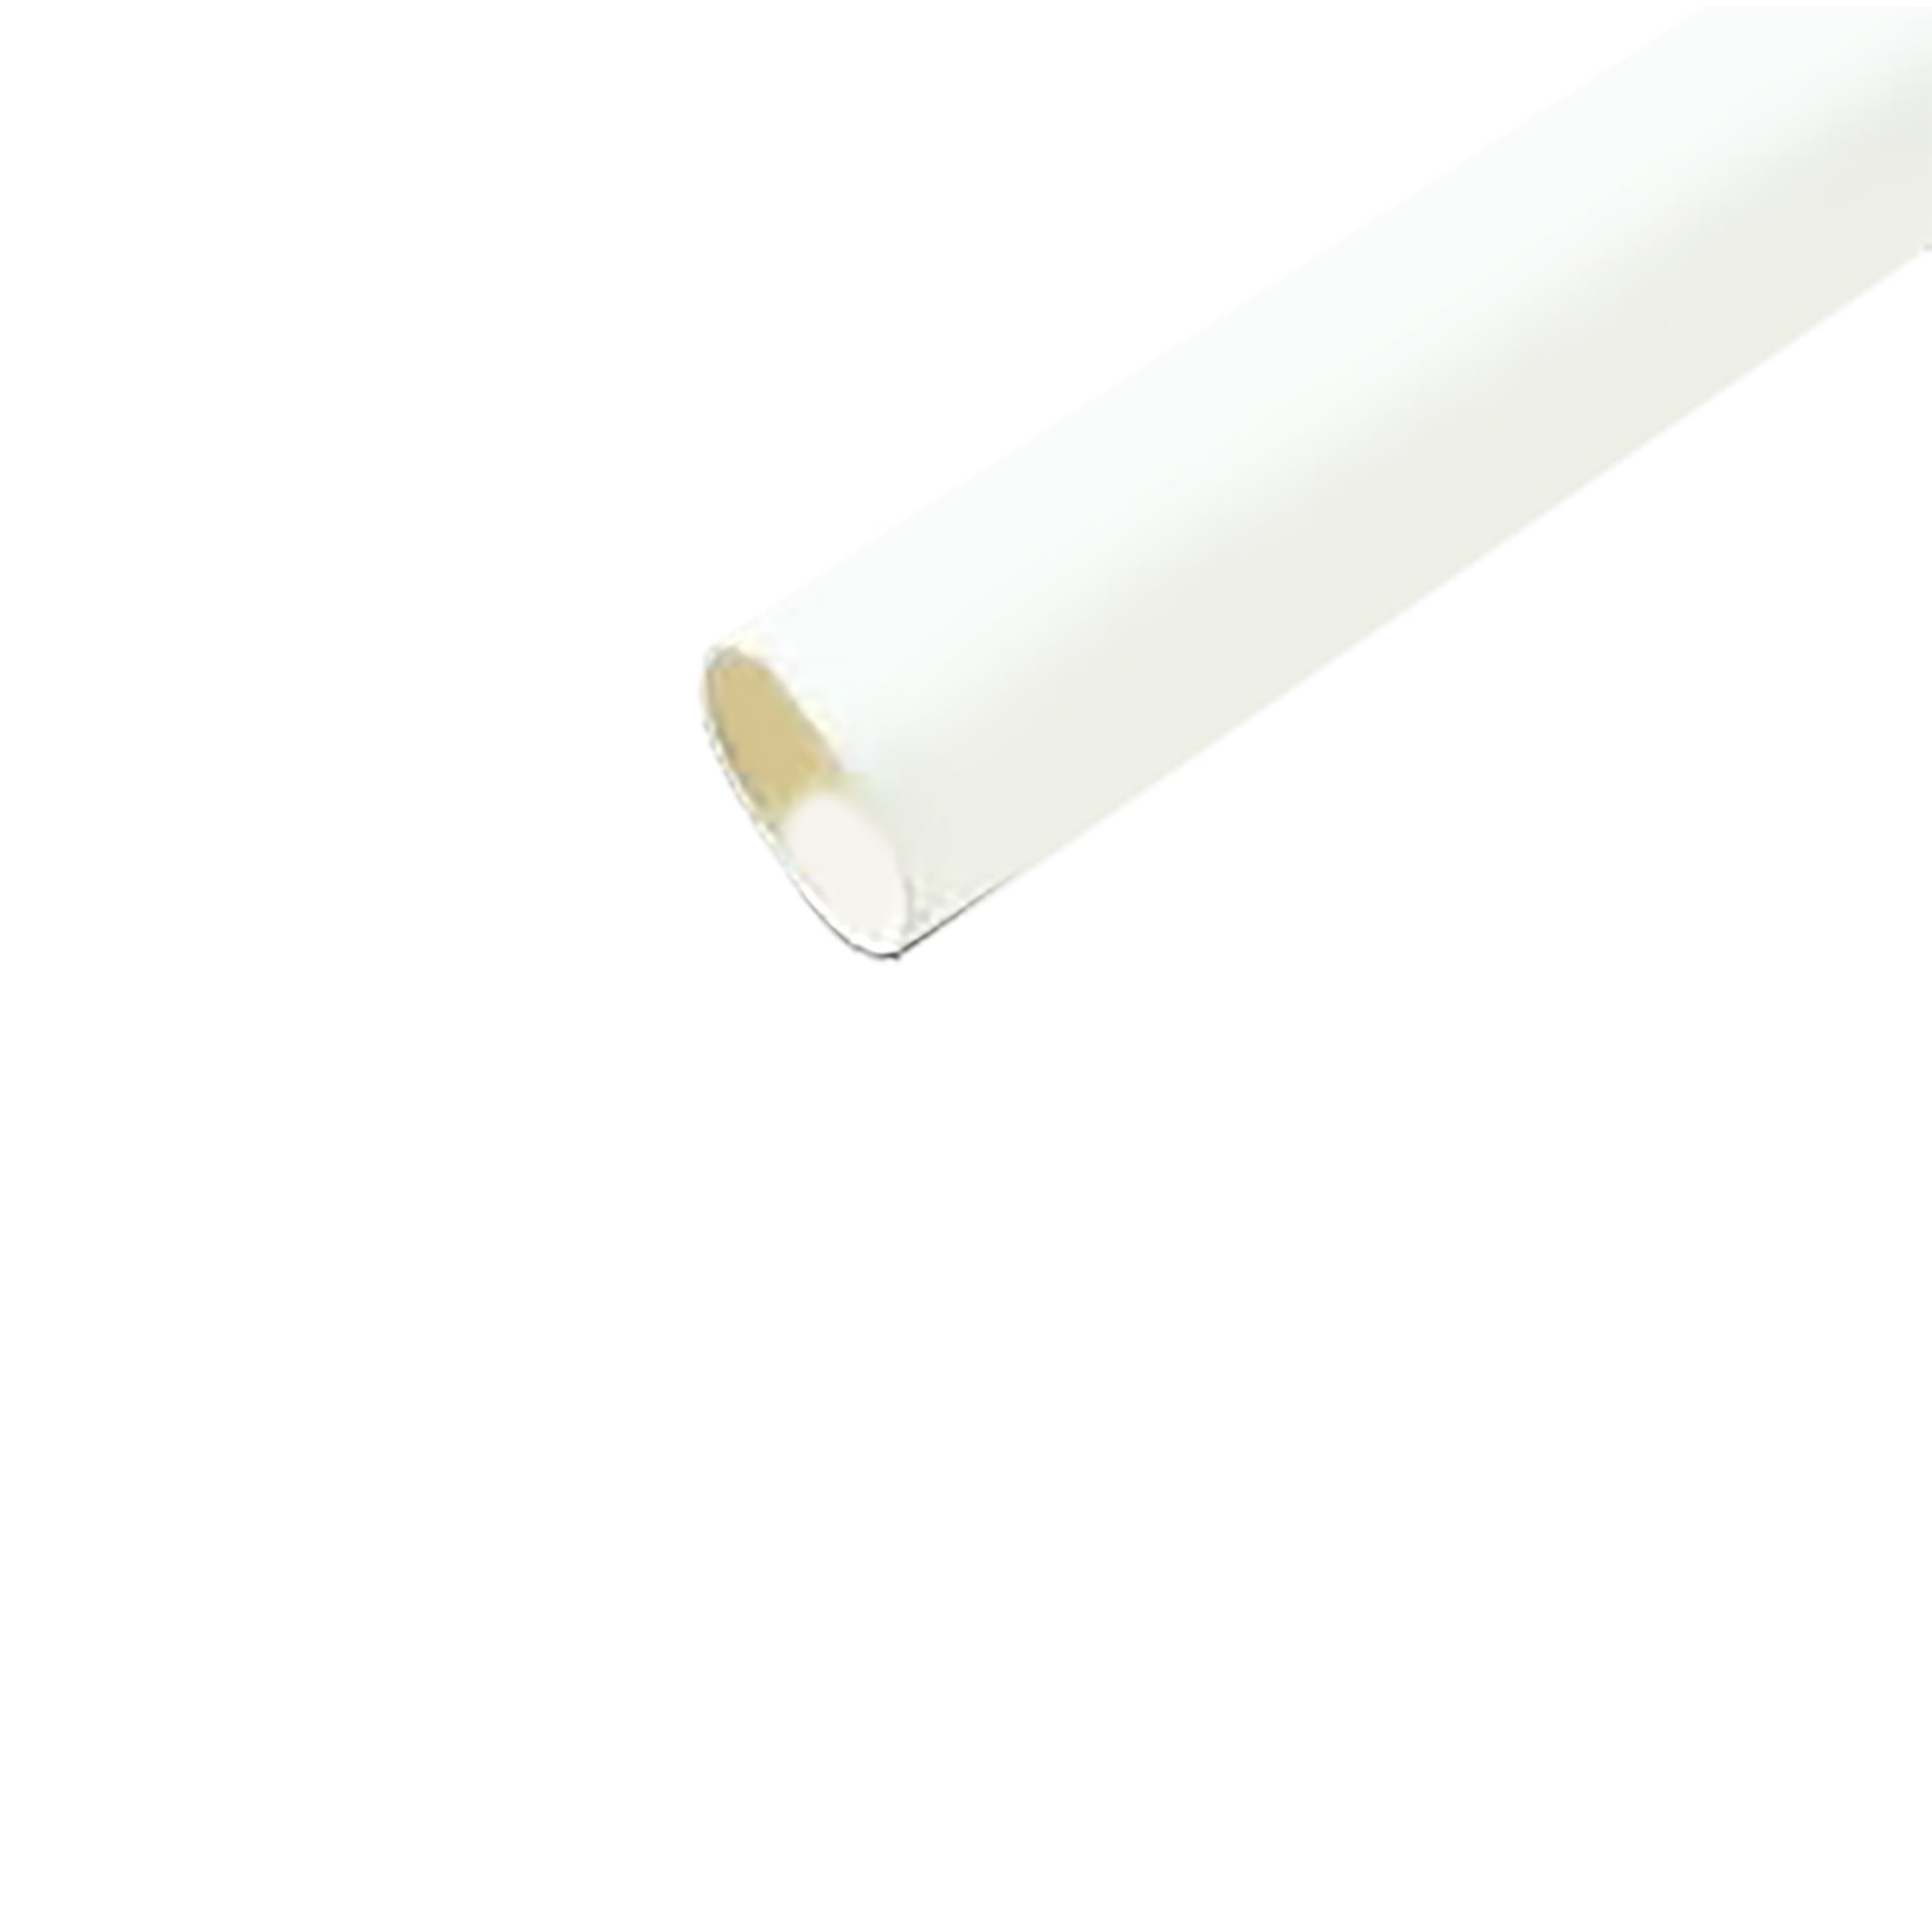 Flexible Thin Single Wall Non-Adhesive Heat Shrink Tubing 2:1 White 3/8" ID - 12" Inch 10 Pack